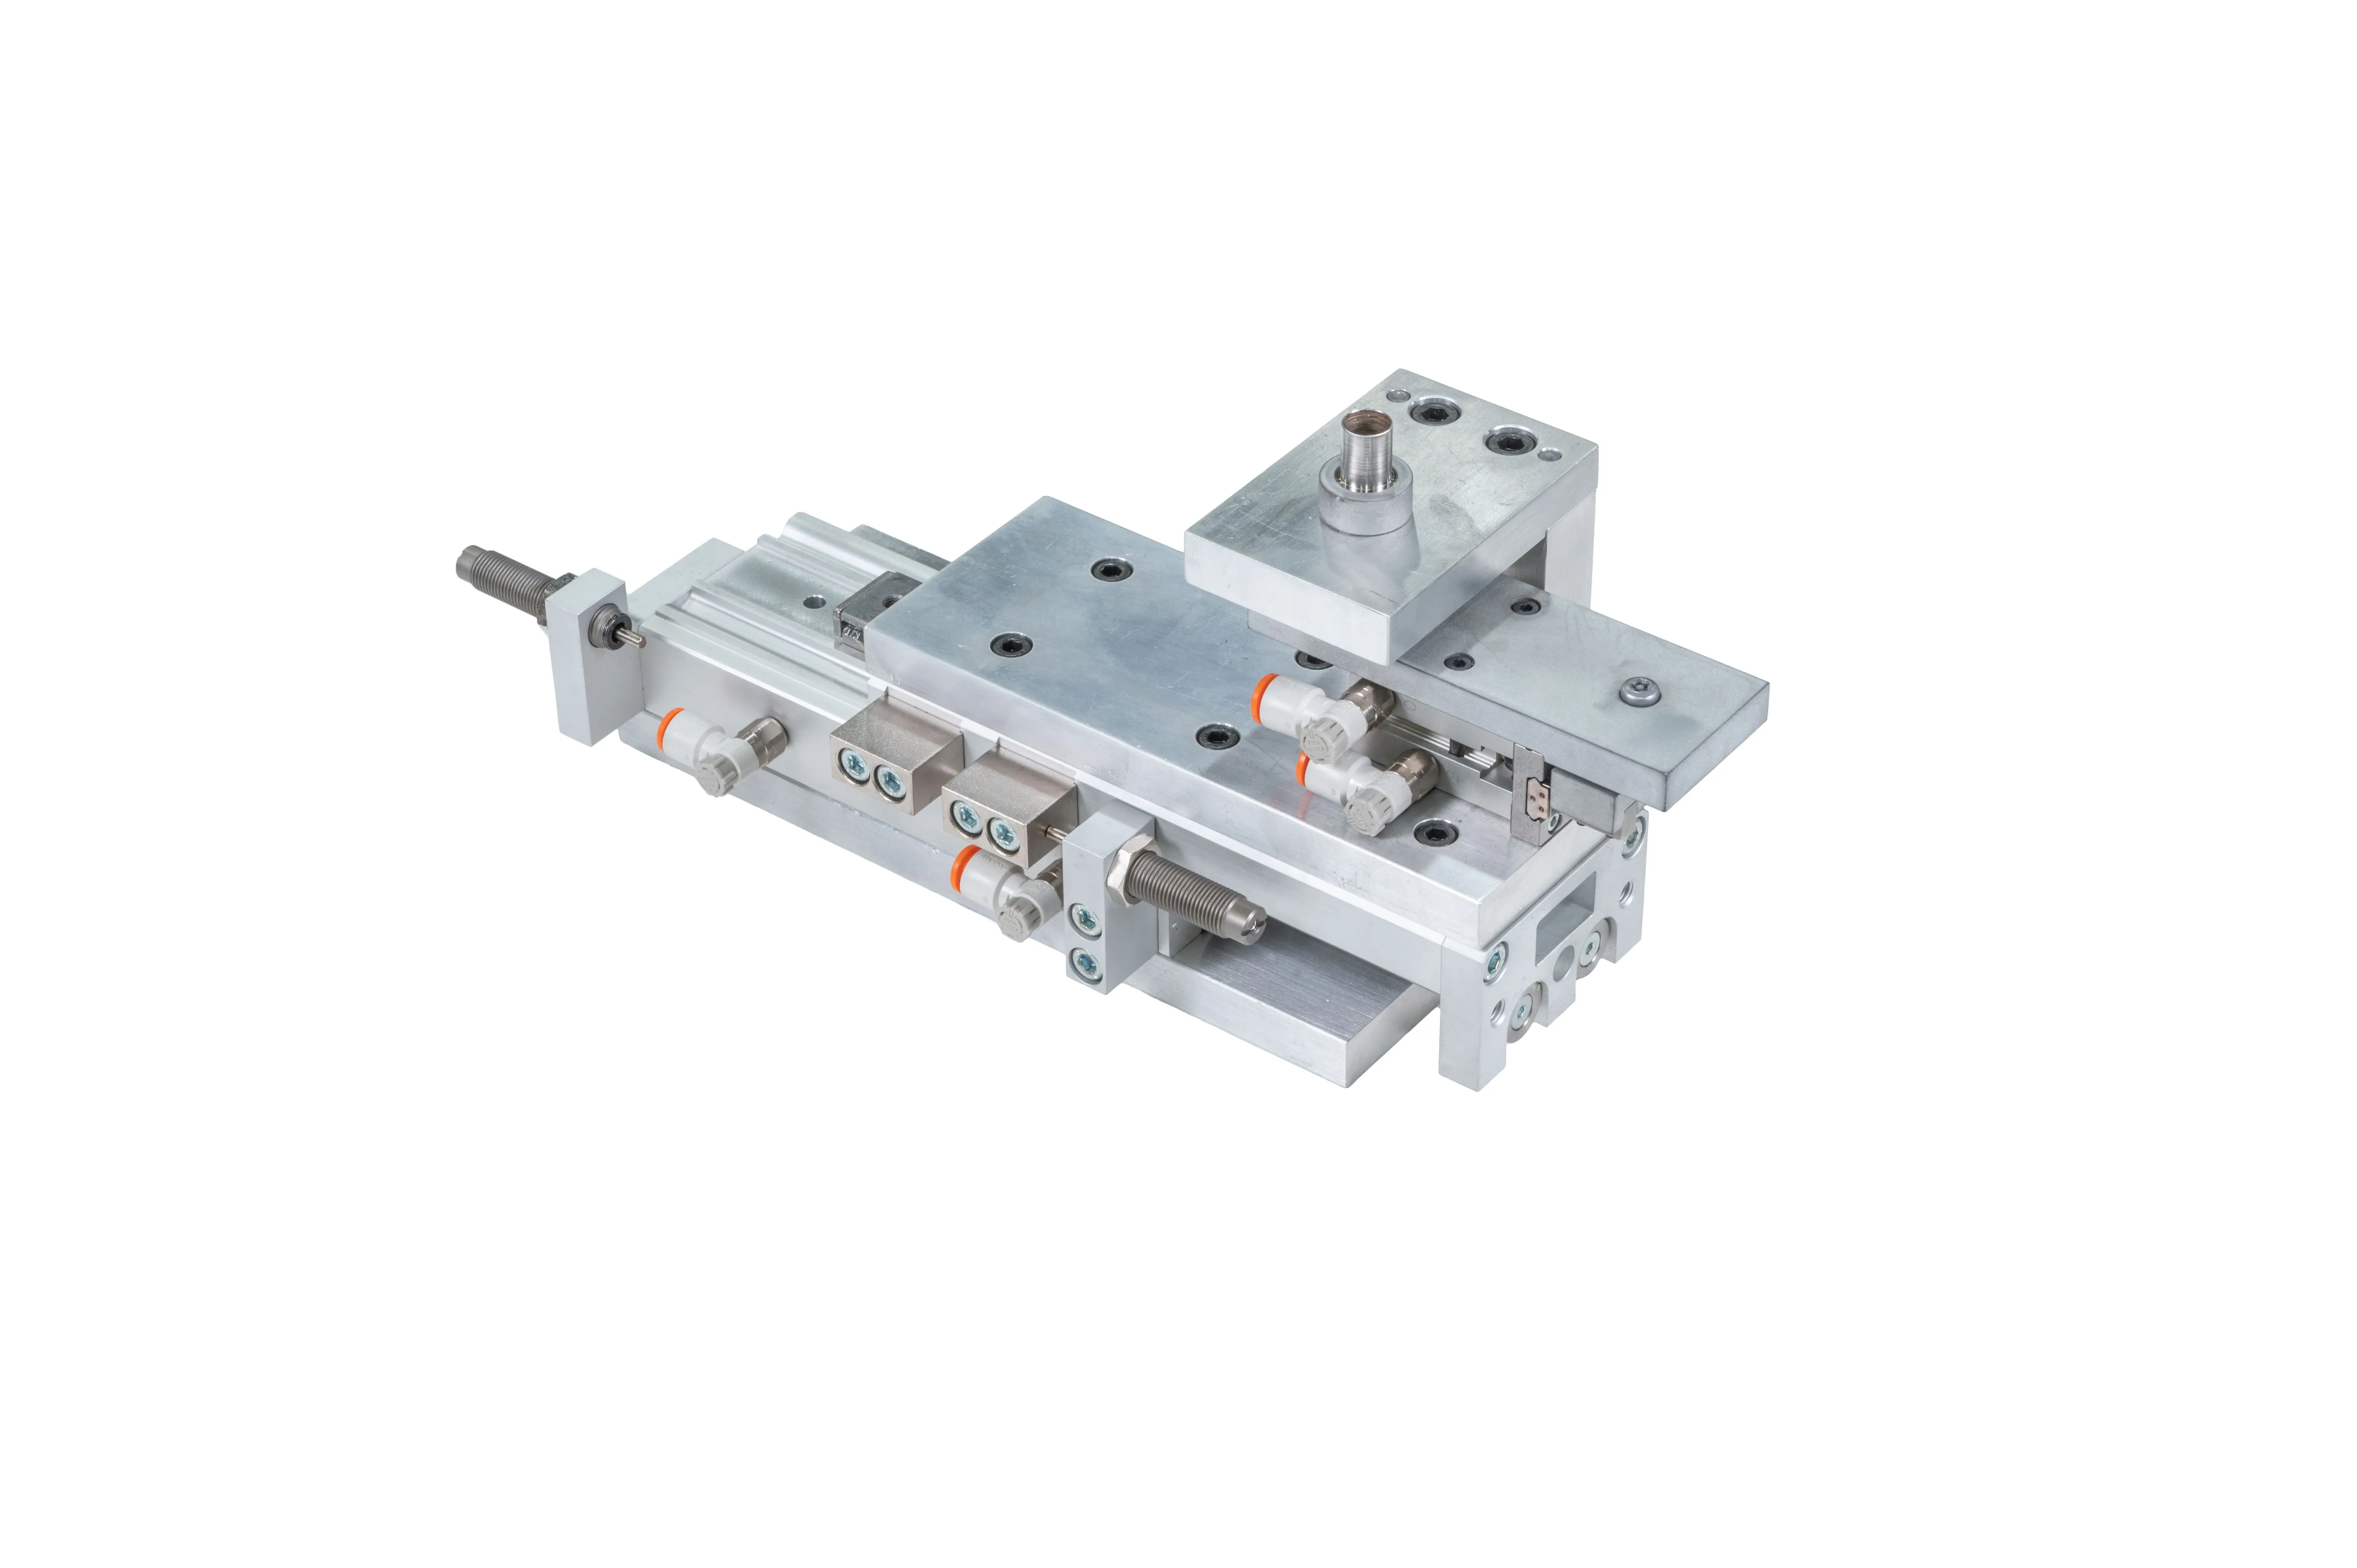 Precision industrial pneumatic slide actuator on white background